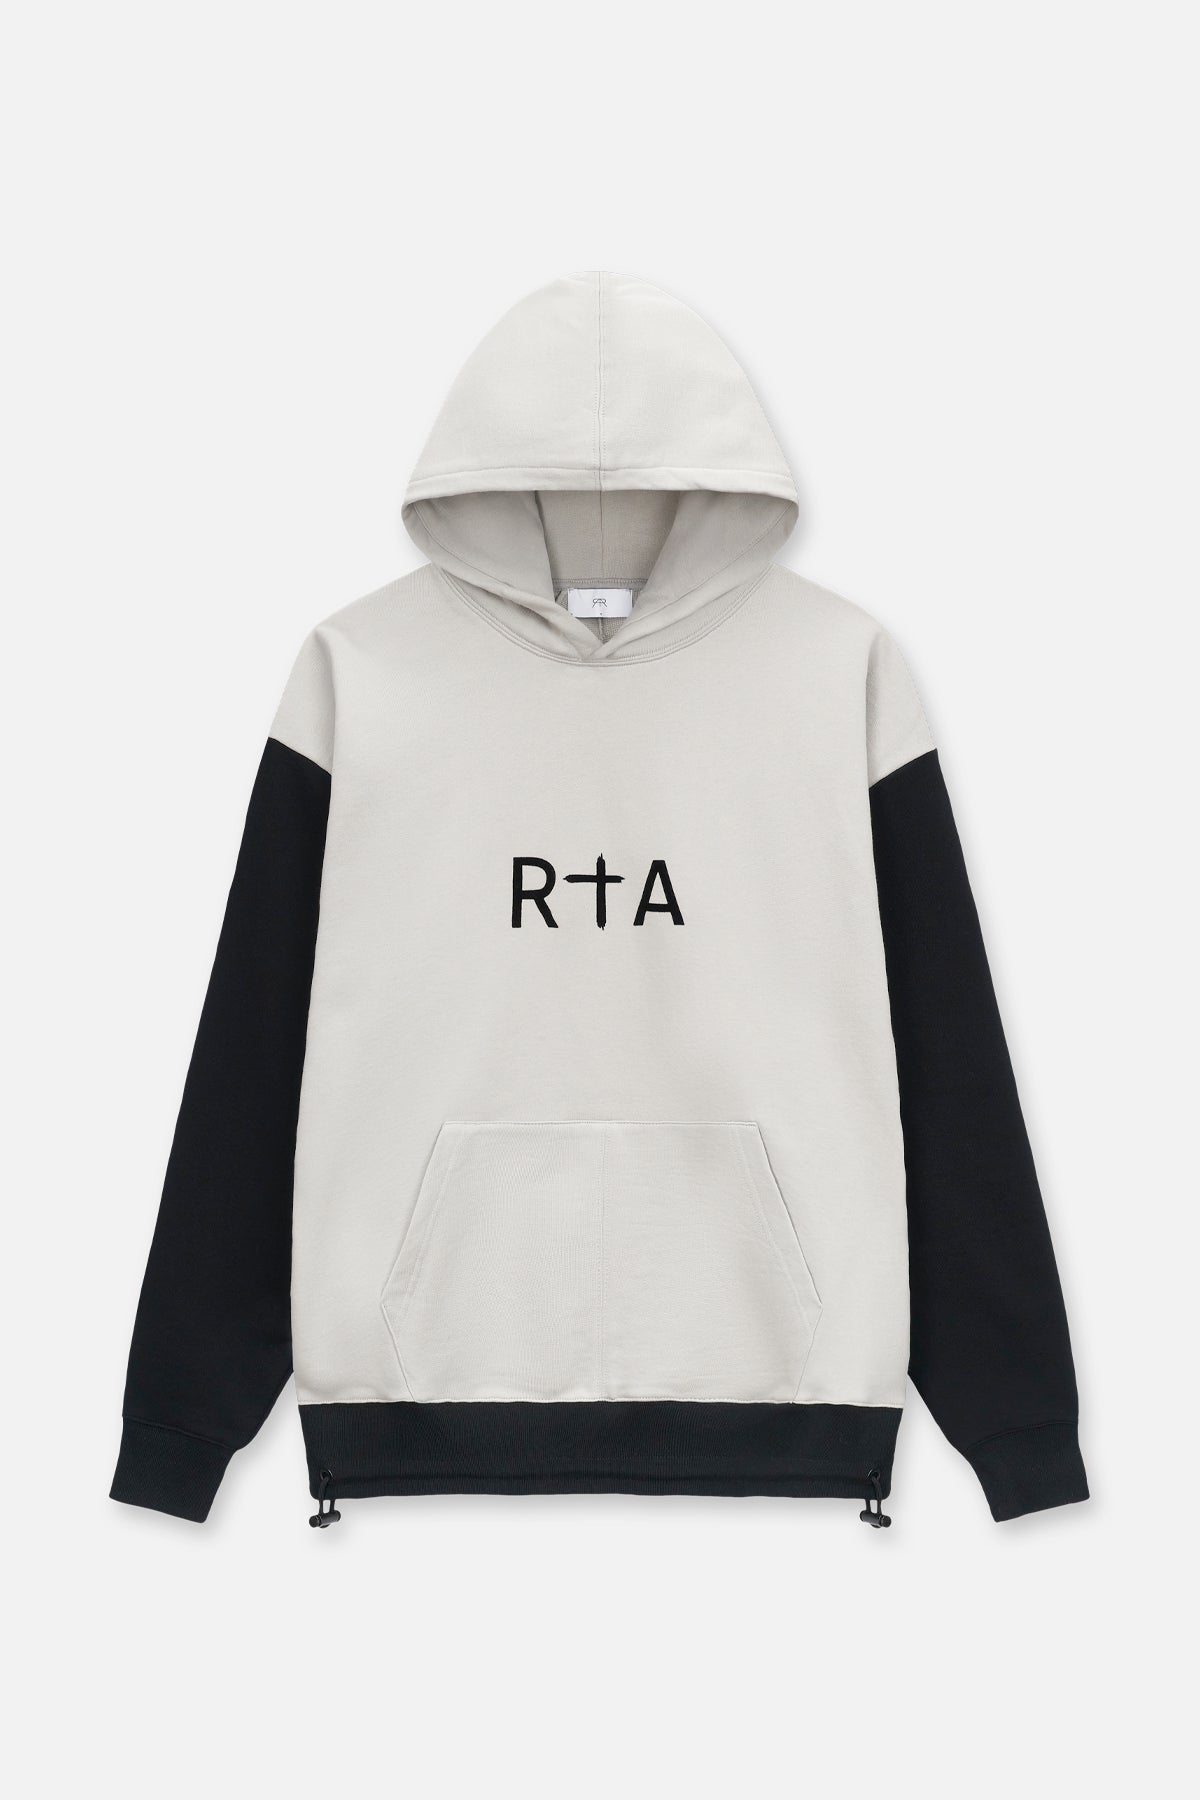 Latest Men's RTA Hoodie: Explore the Latest Collection